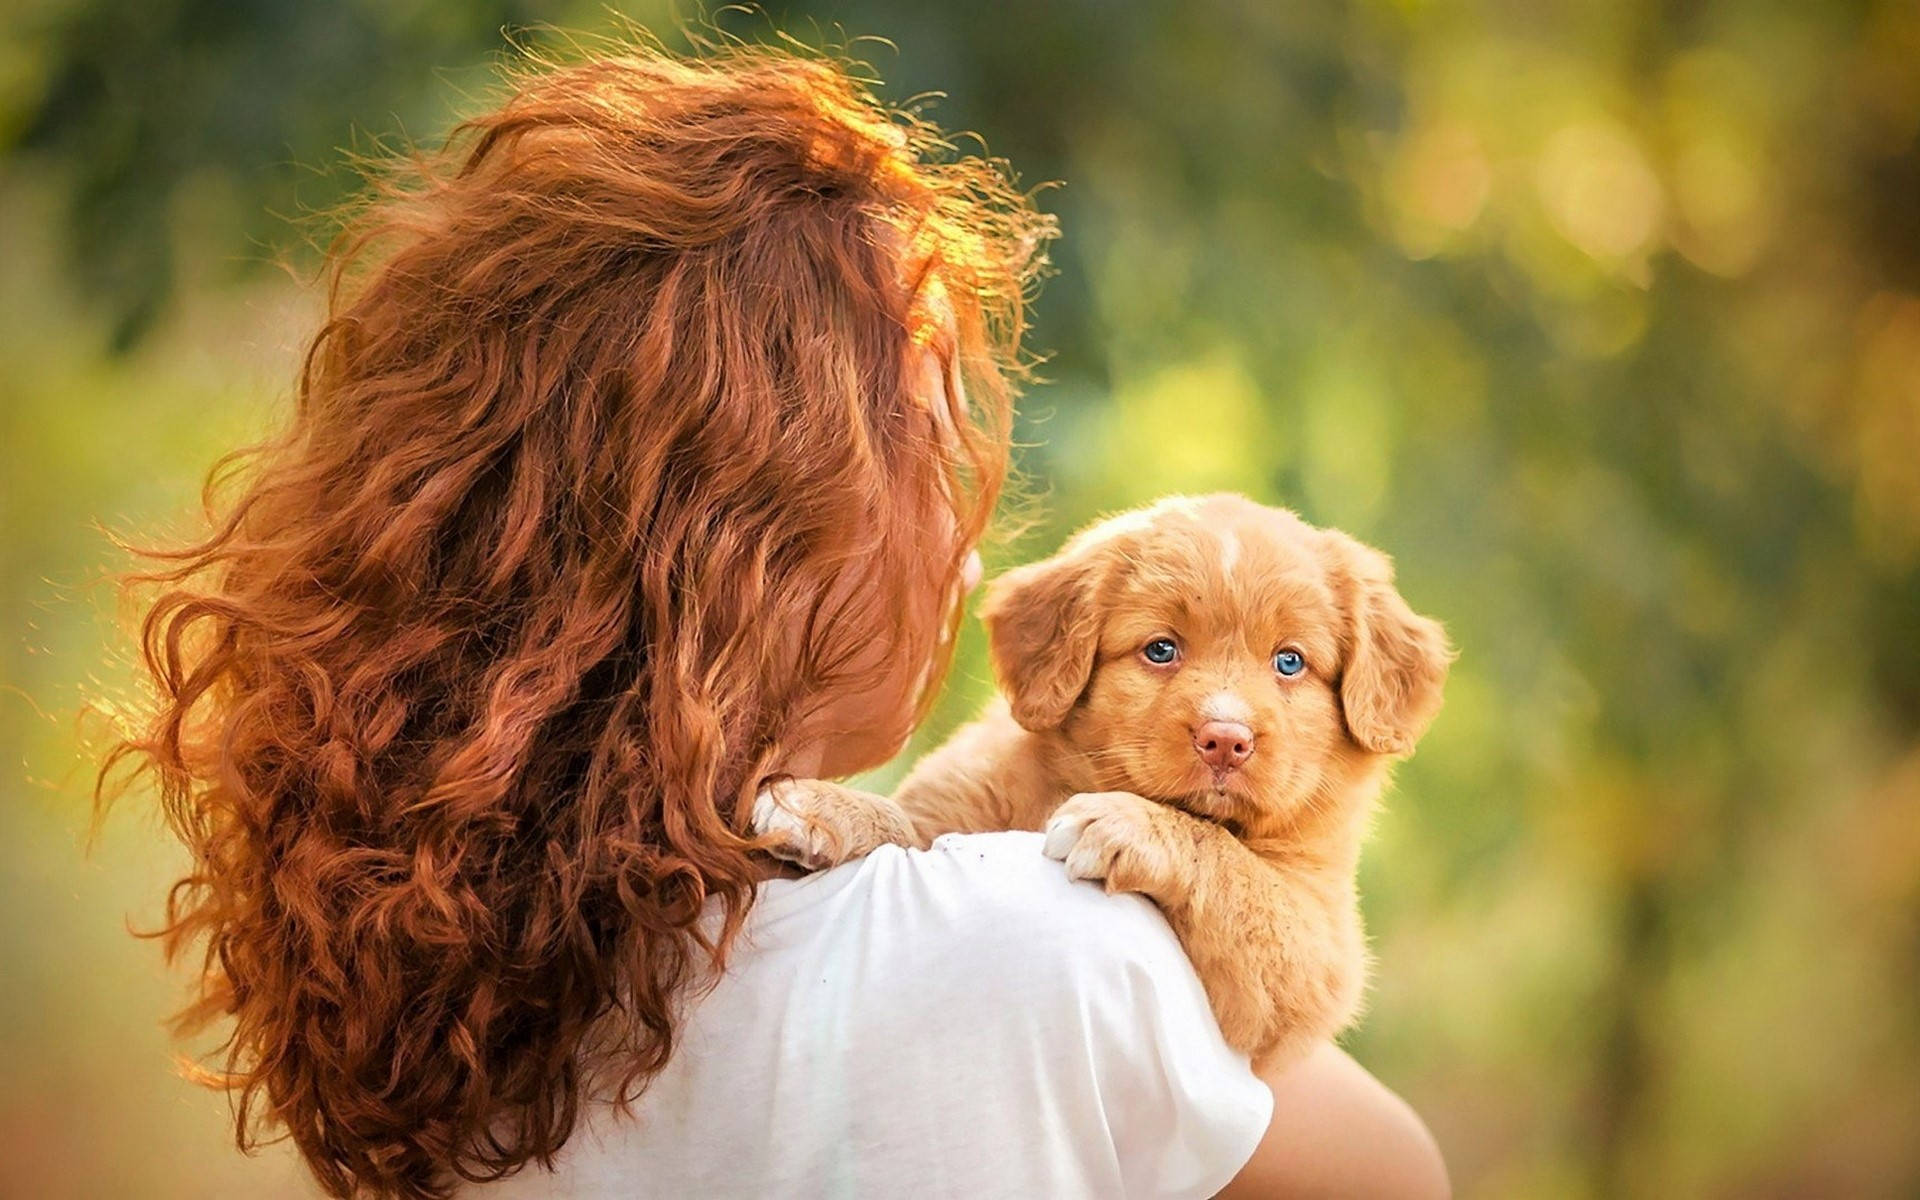 Small Golden Cute Puppy And Woman Background